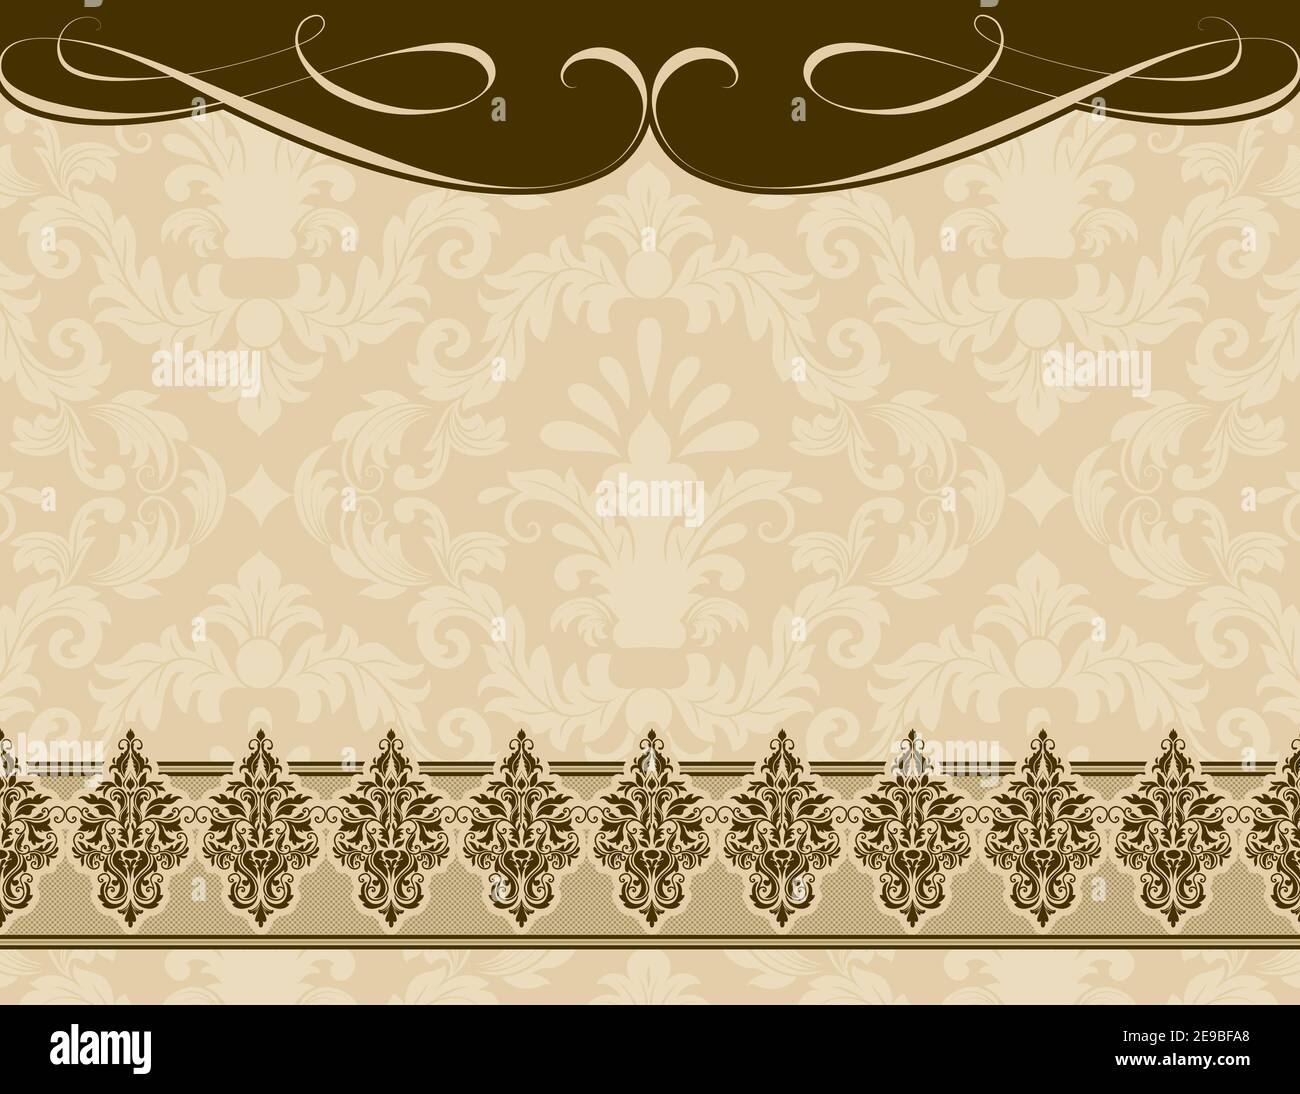 Vintage background with patterns and decorative border. Template ...